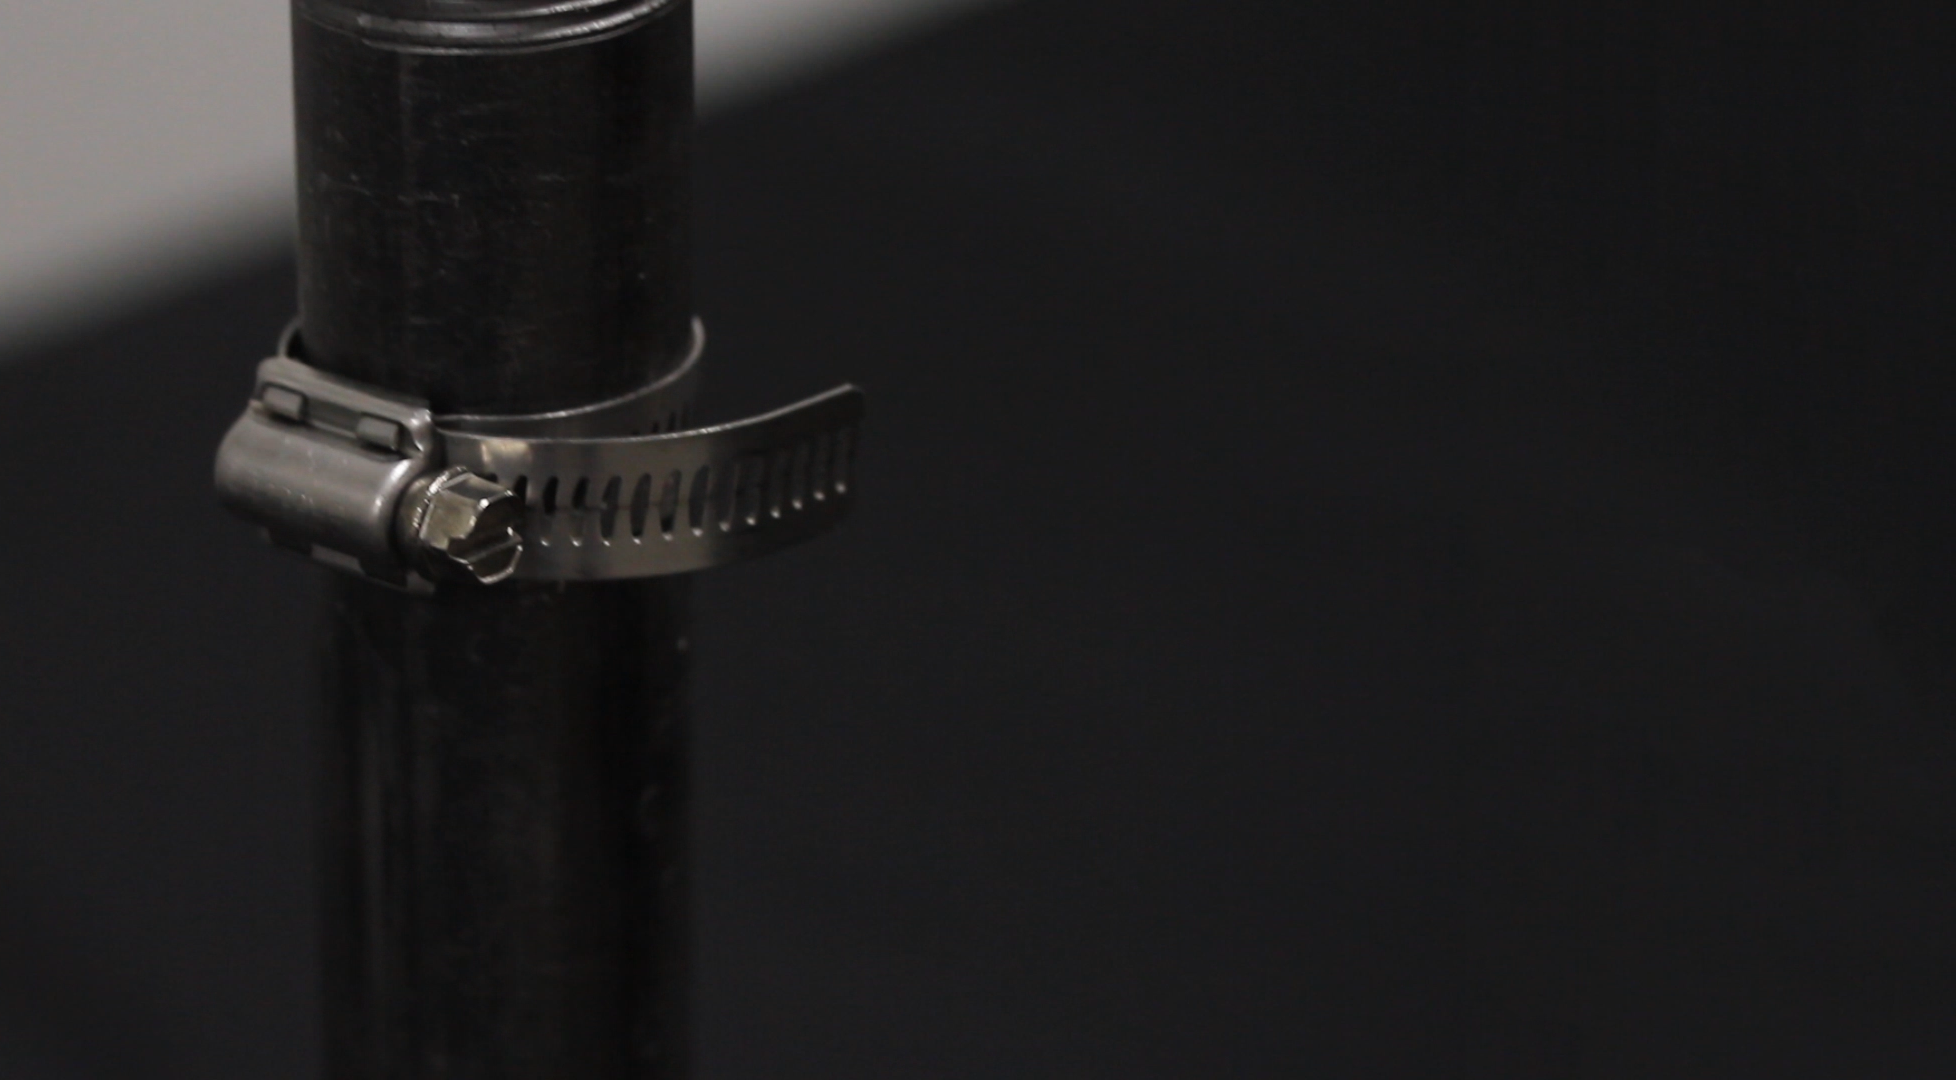 3 Myths about Gear Clamps that are Completely Bogus